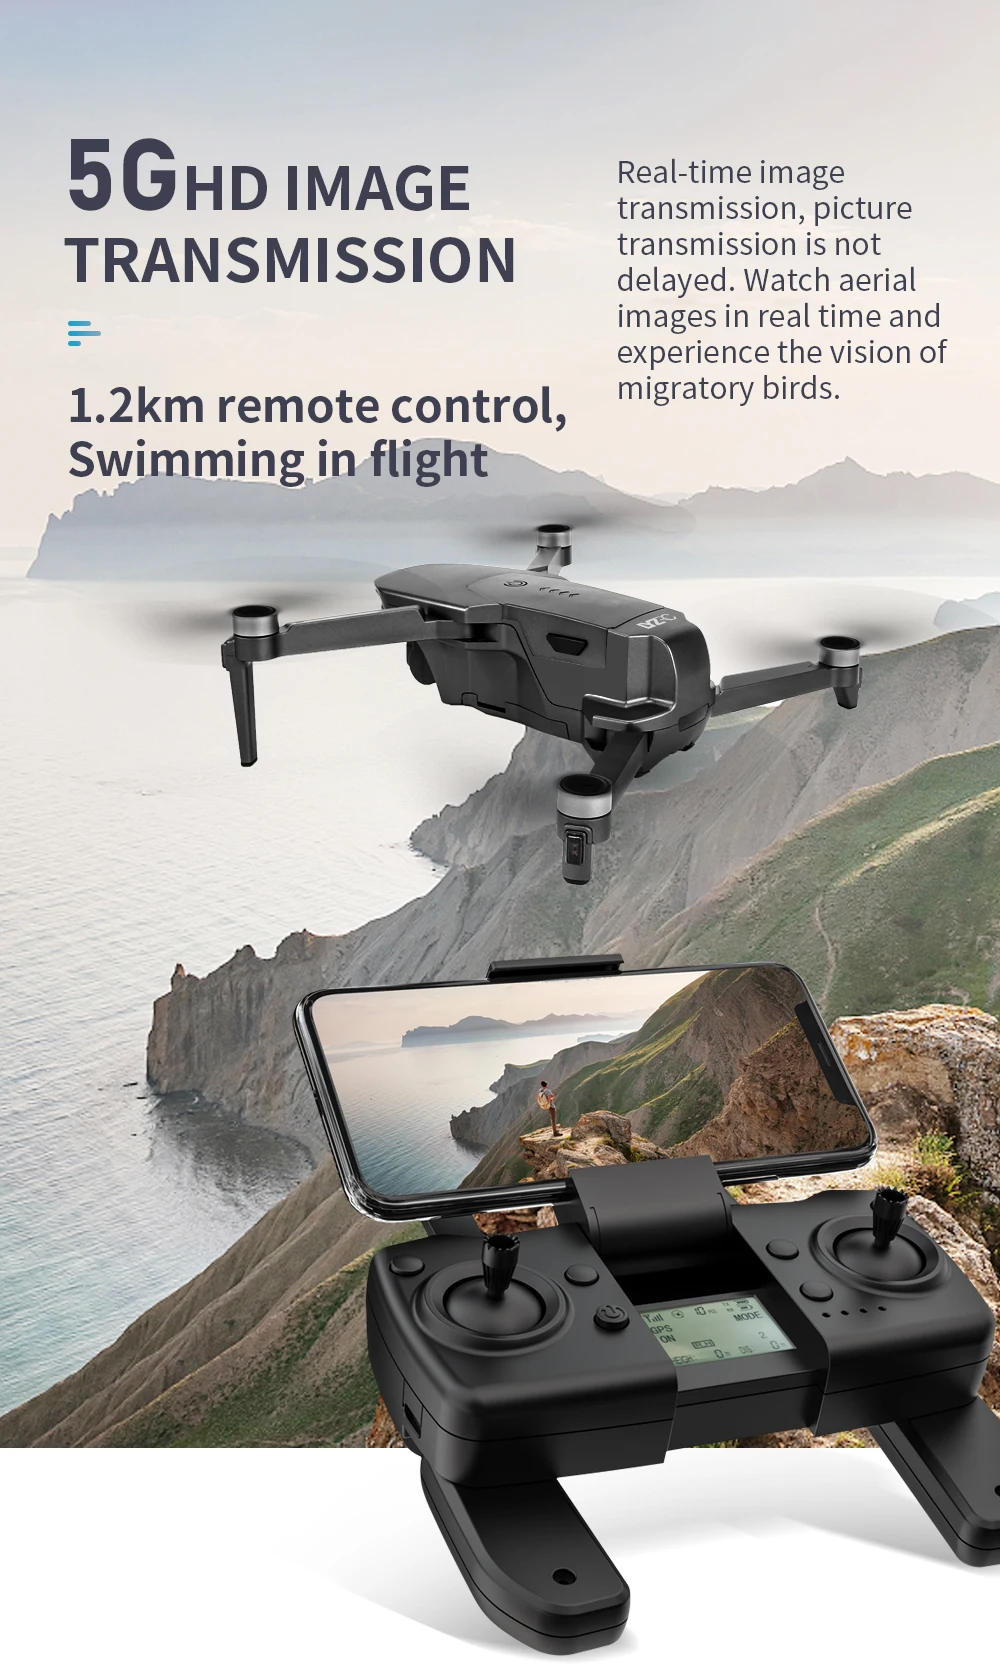 L300 GPS Drone, Watch aerial images in real time and experience the vision of 1.2km remote control, mig